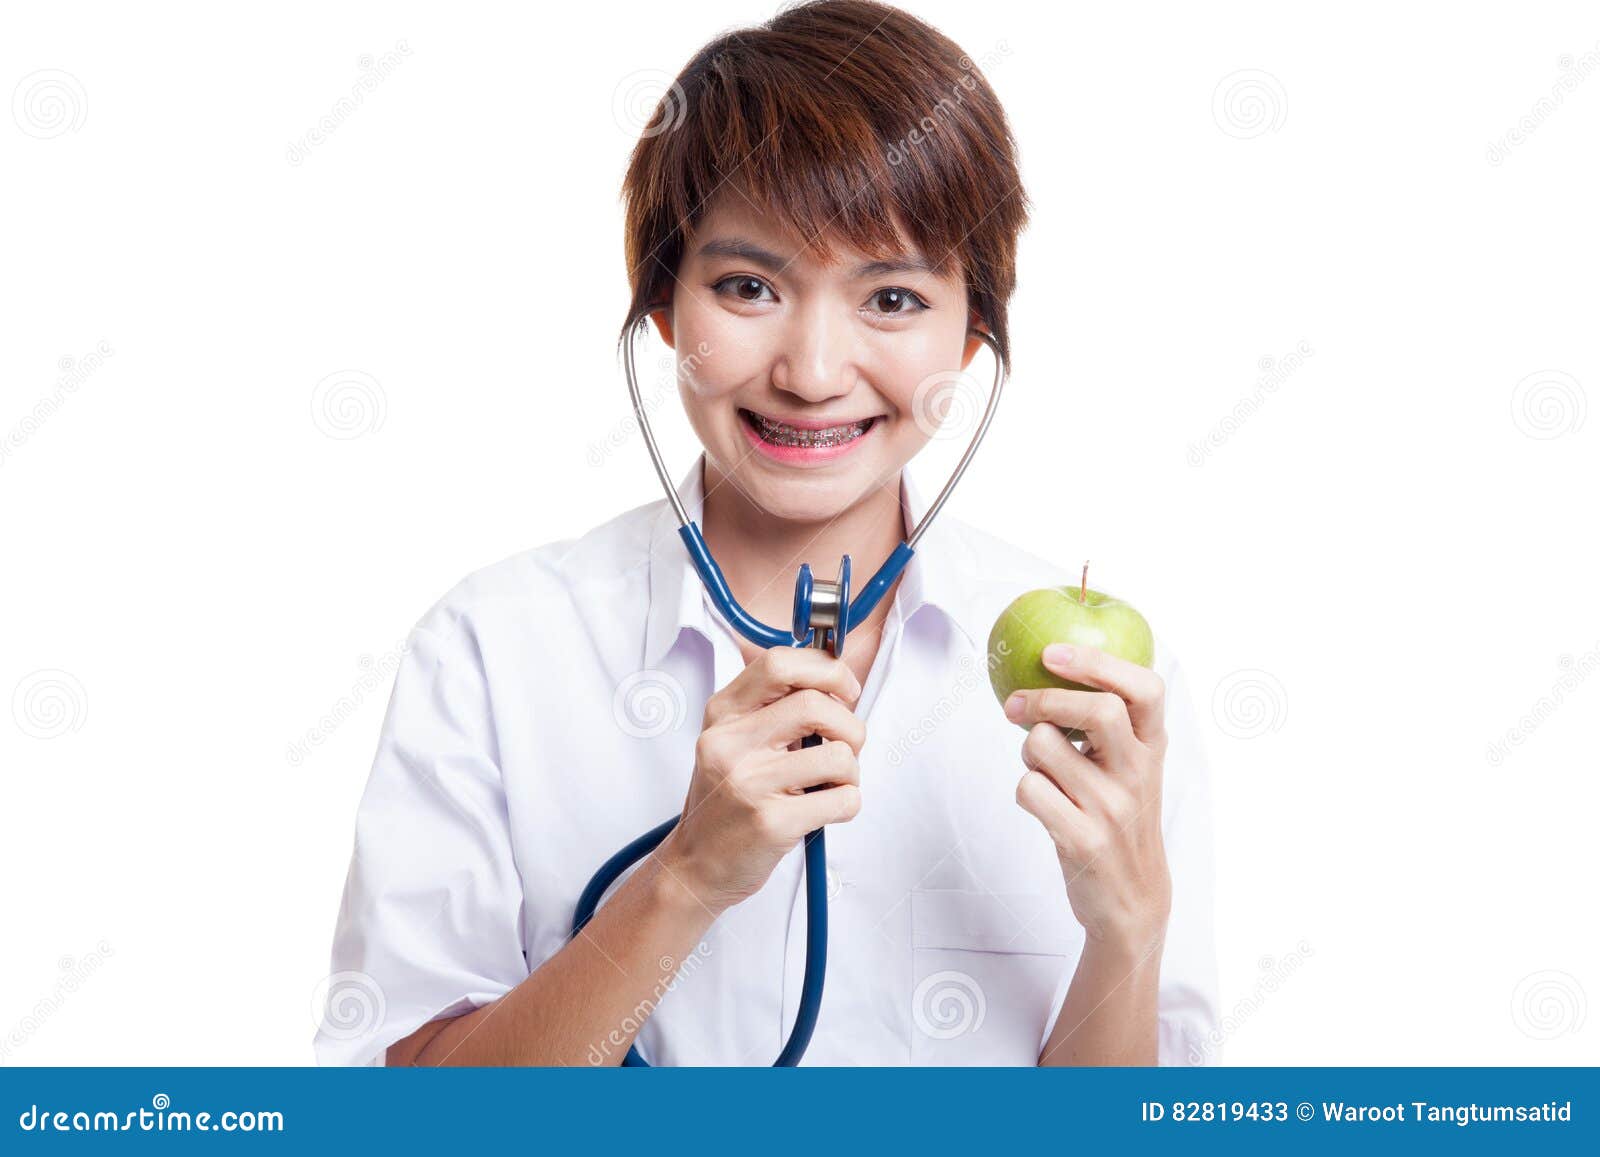 Young Asian female doctor listening to an apple with a stethoscope. Young Asian female doctor listening to an apple with a stethoscope isolated on white background.